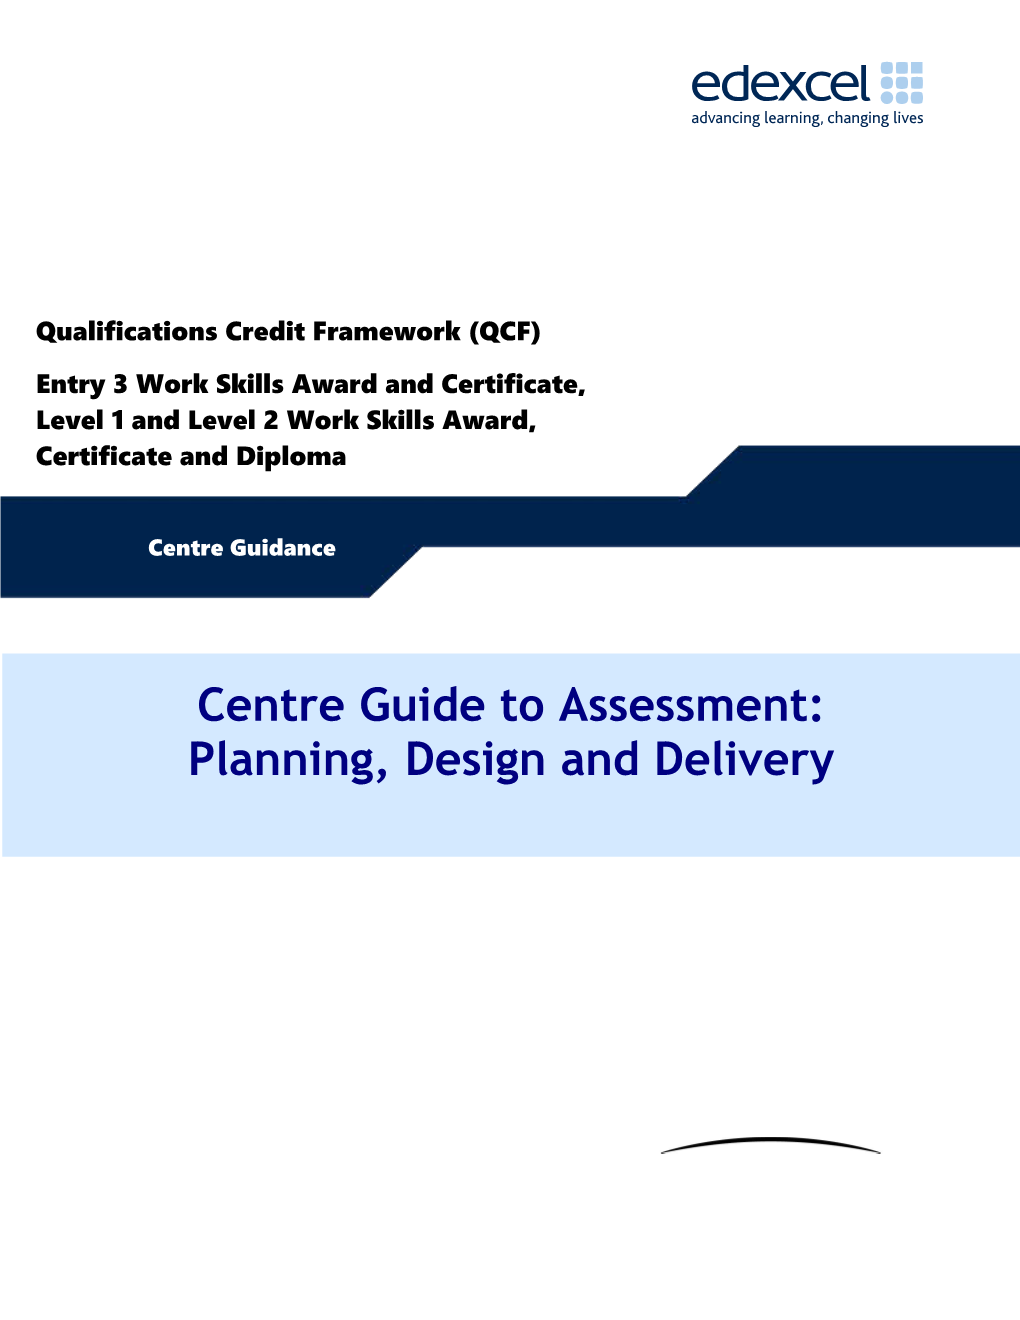 Centre Guide to Assessment